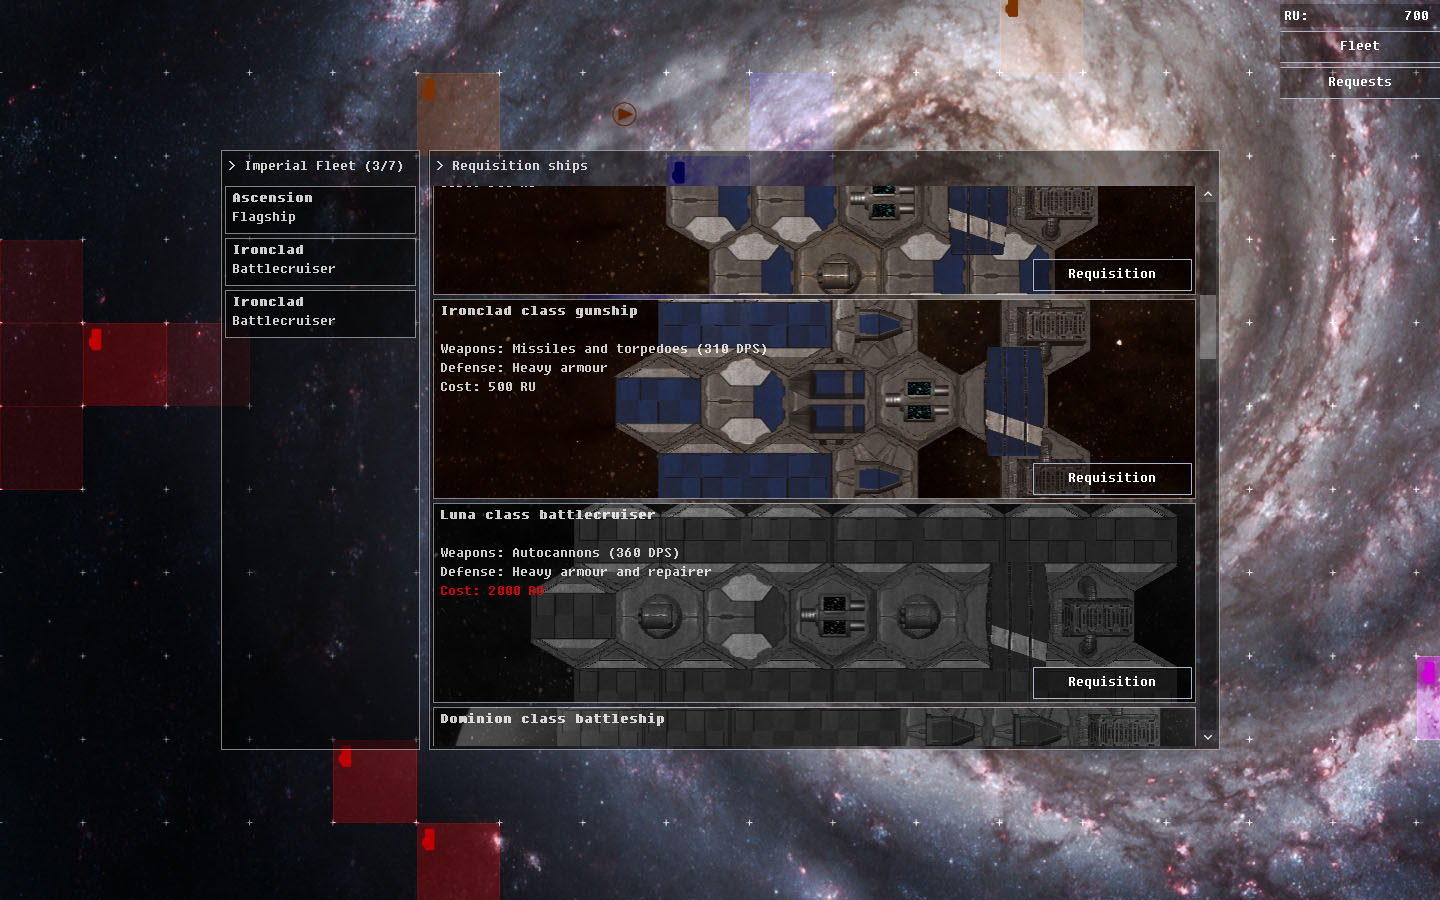 No longer constrained to gunships, the player can now bring Imperial battlecruisers and battleships to his fleet.